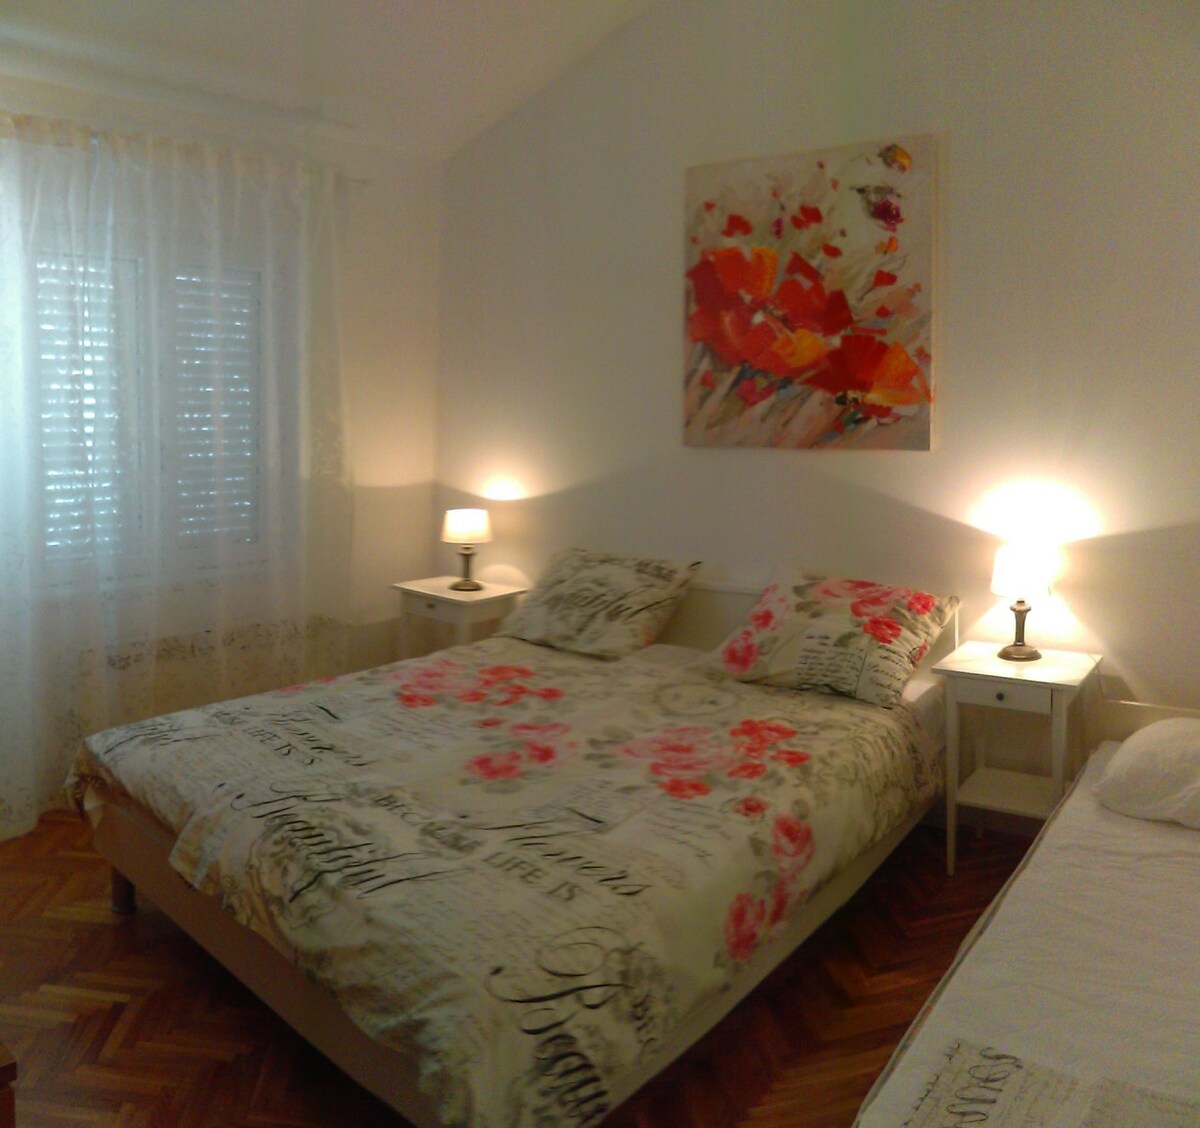 A-5913-b Two bedroom apartment with terrace and